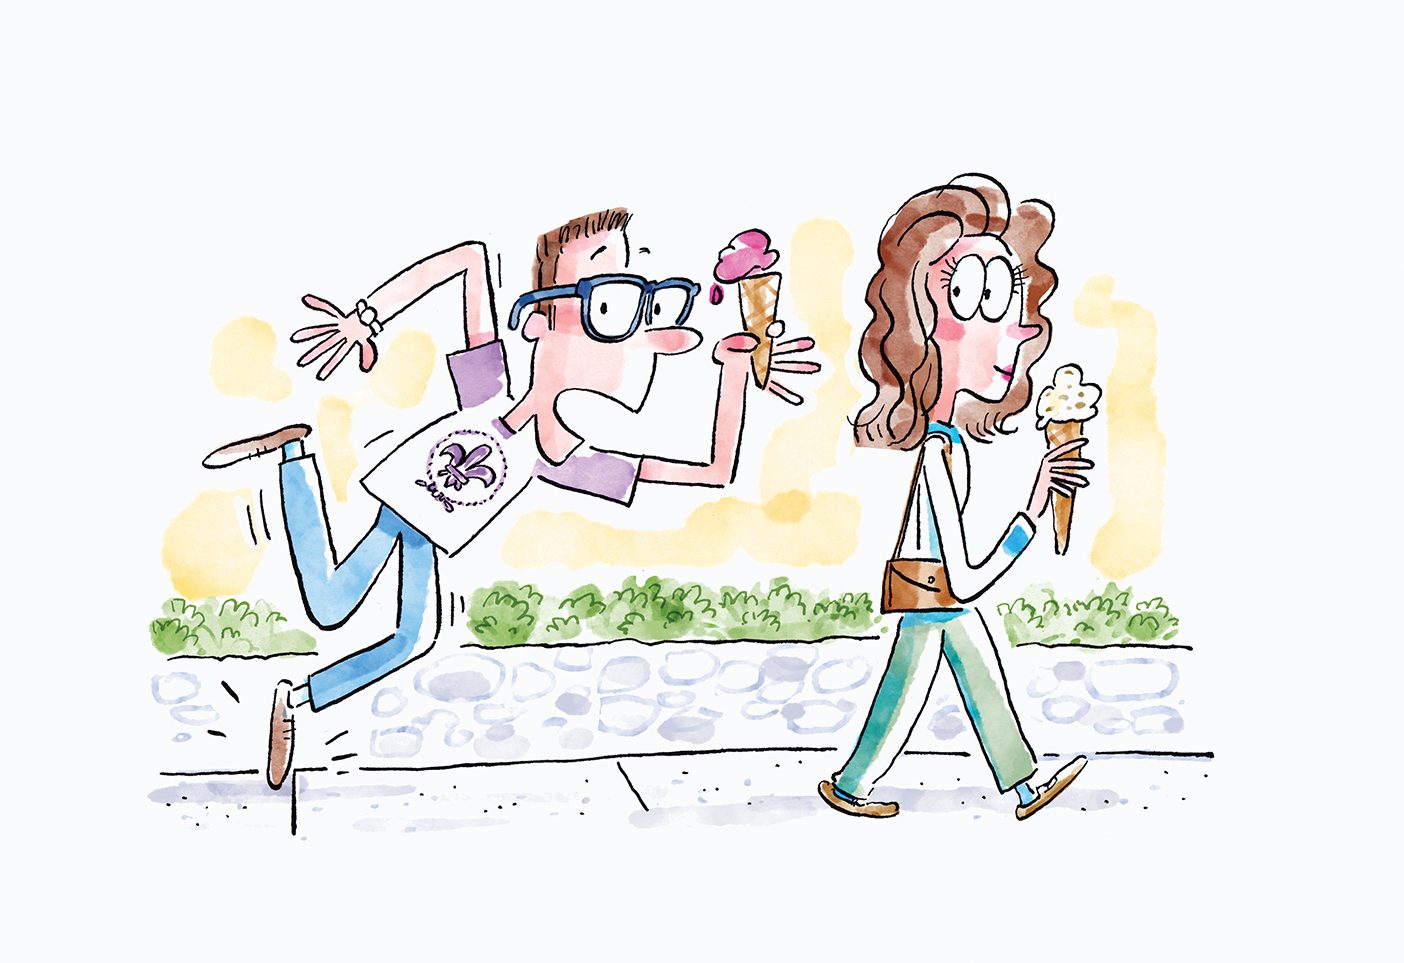 An illustration of a man and woman walking with ice cream cones. The man is the middle of tripping to the ground.